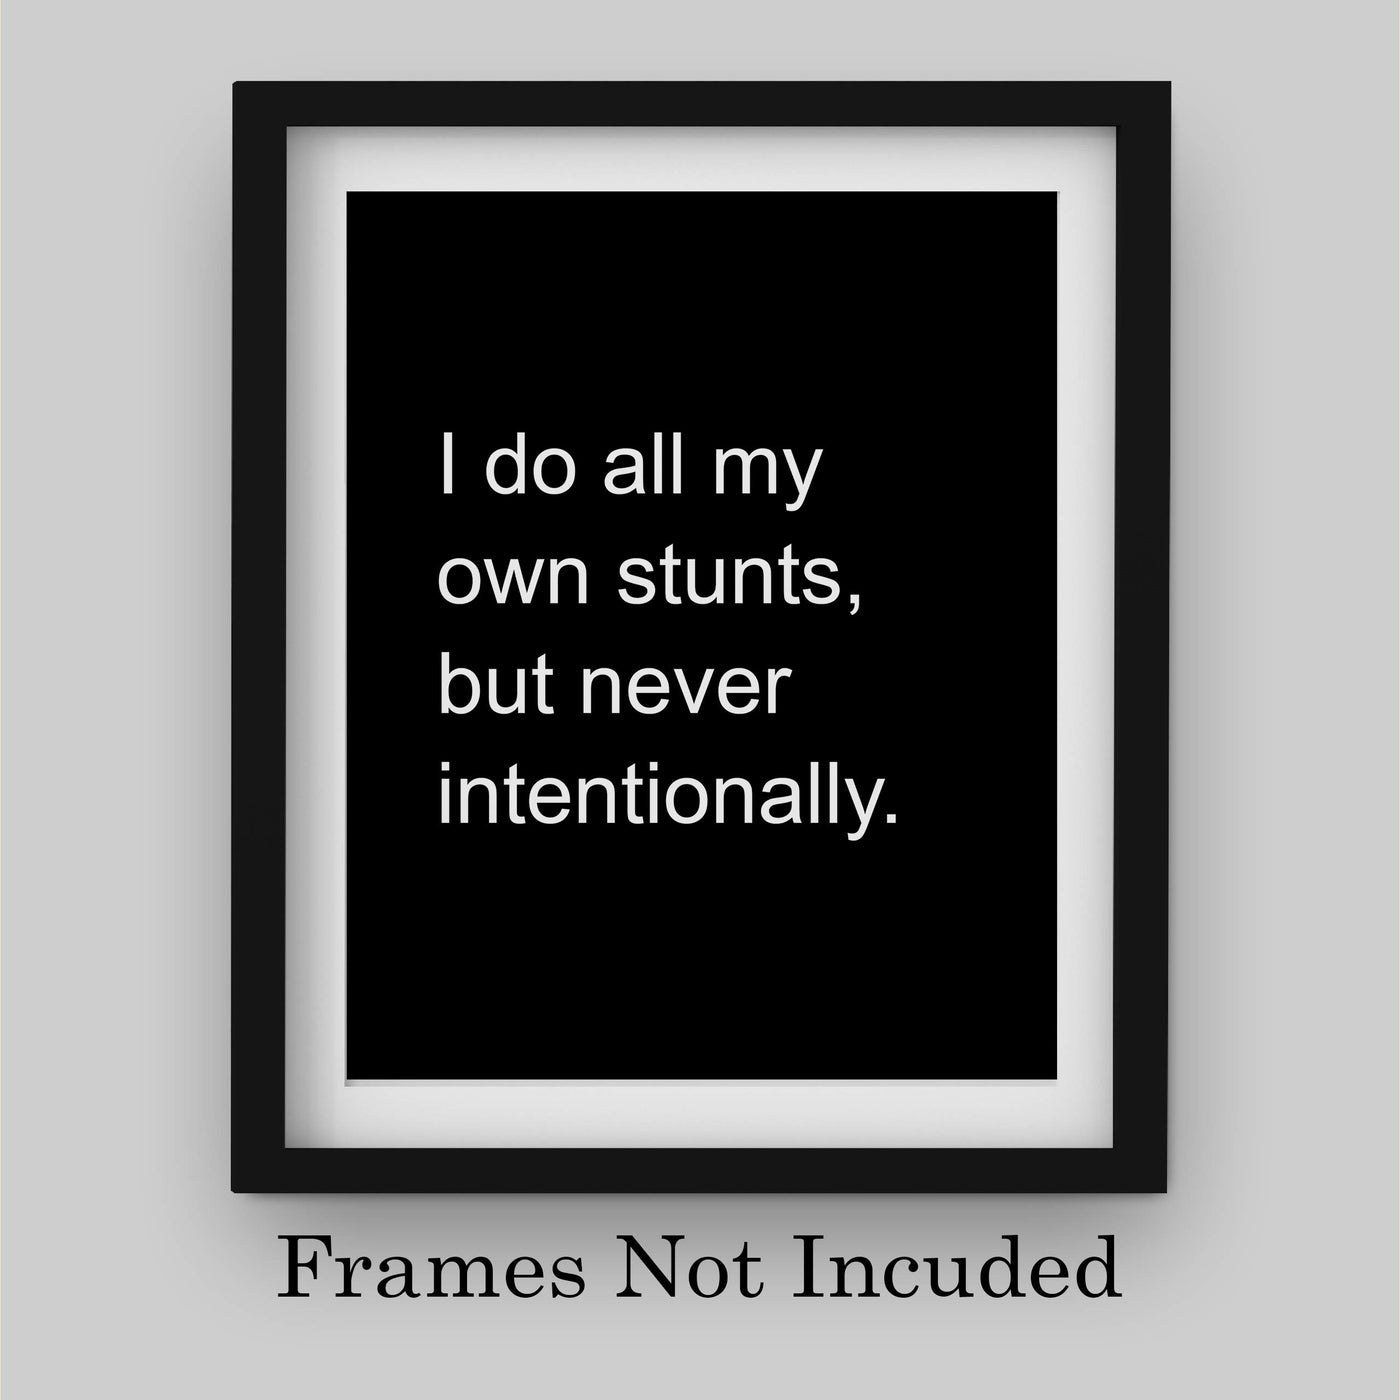 I Do All My Own Stunts But Never Intentionally Funny Wall Art Sign -8 x 10" Humorous Typographic Poster Print-Ready to Frame. Home-Office-Bar-Shop Decor. Fun Gift for Sarcastic Friends & Family!